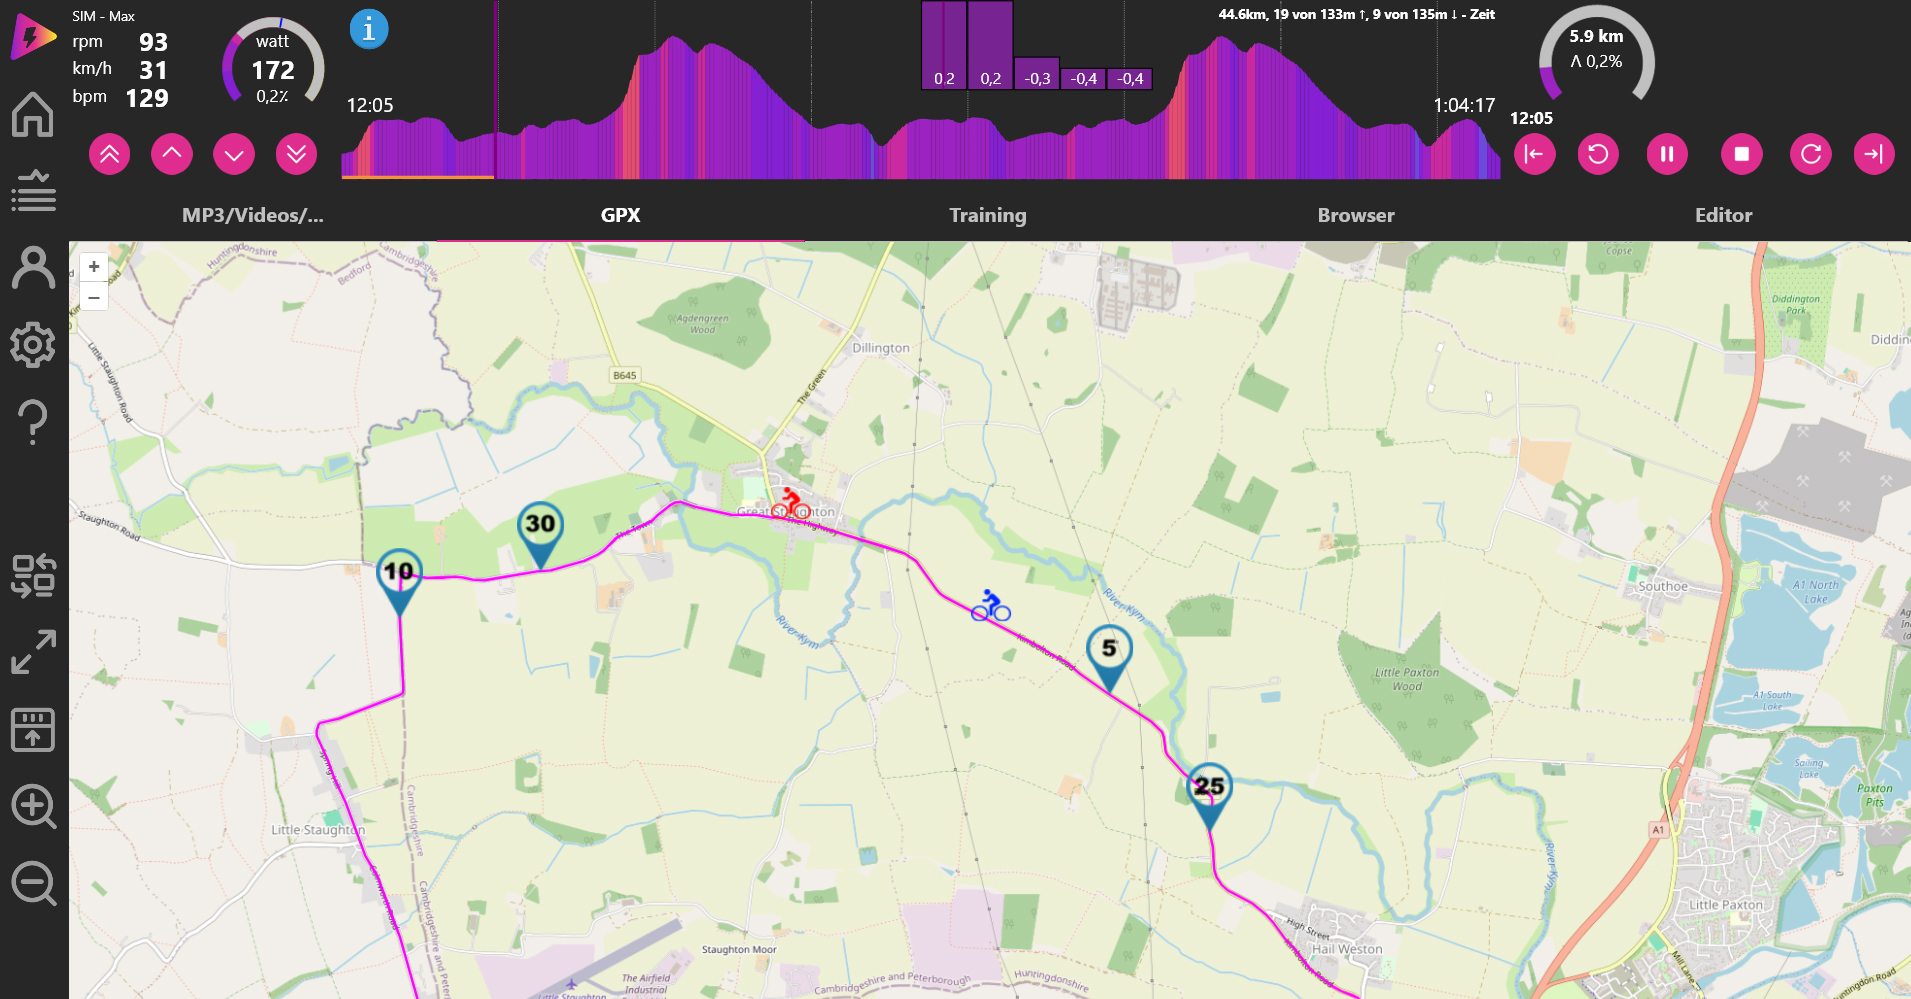 Riding the bike course of St. Neots Triathlon with icTrainer